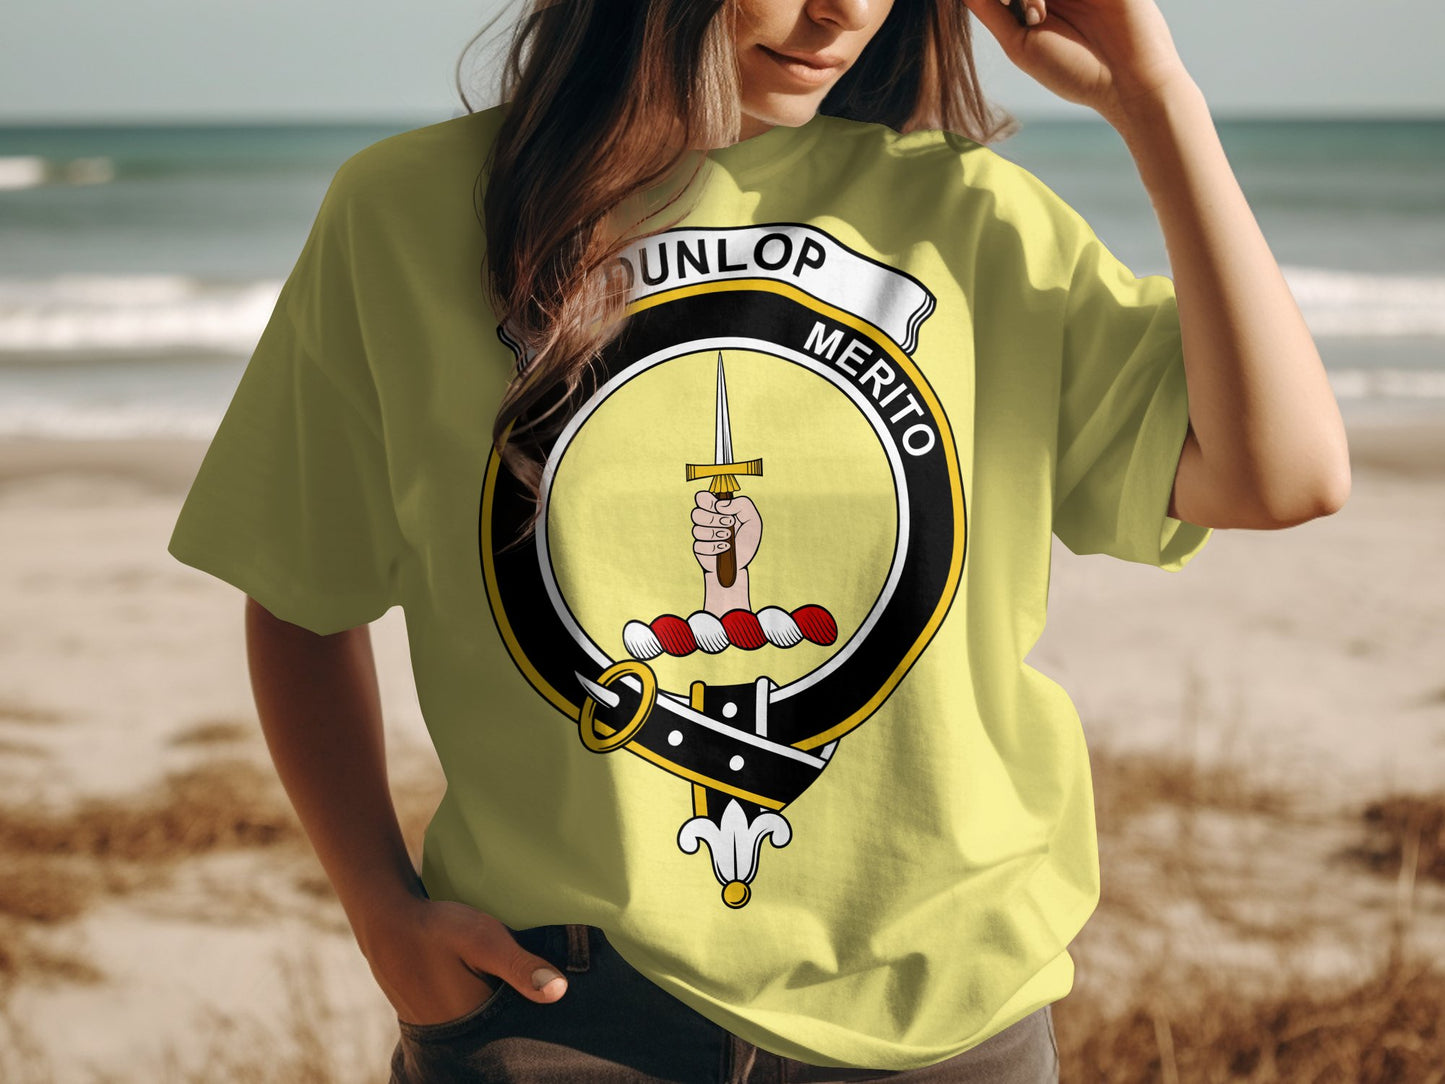 Dunlop Scottish Clan Crest T-Shirt for Highland Games - Living Stone Gifts